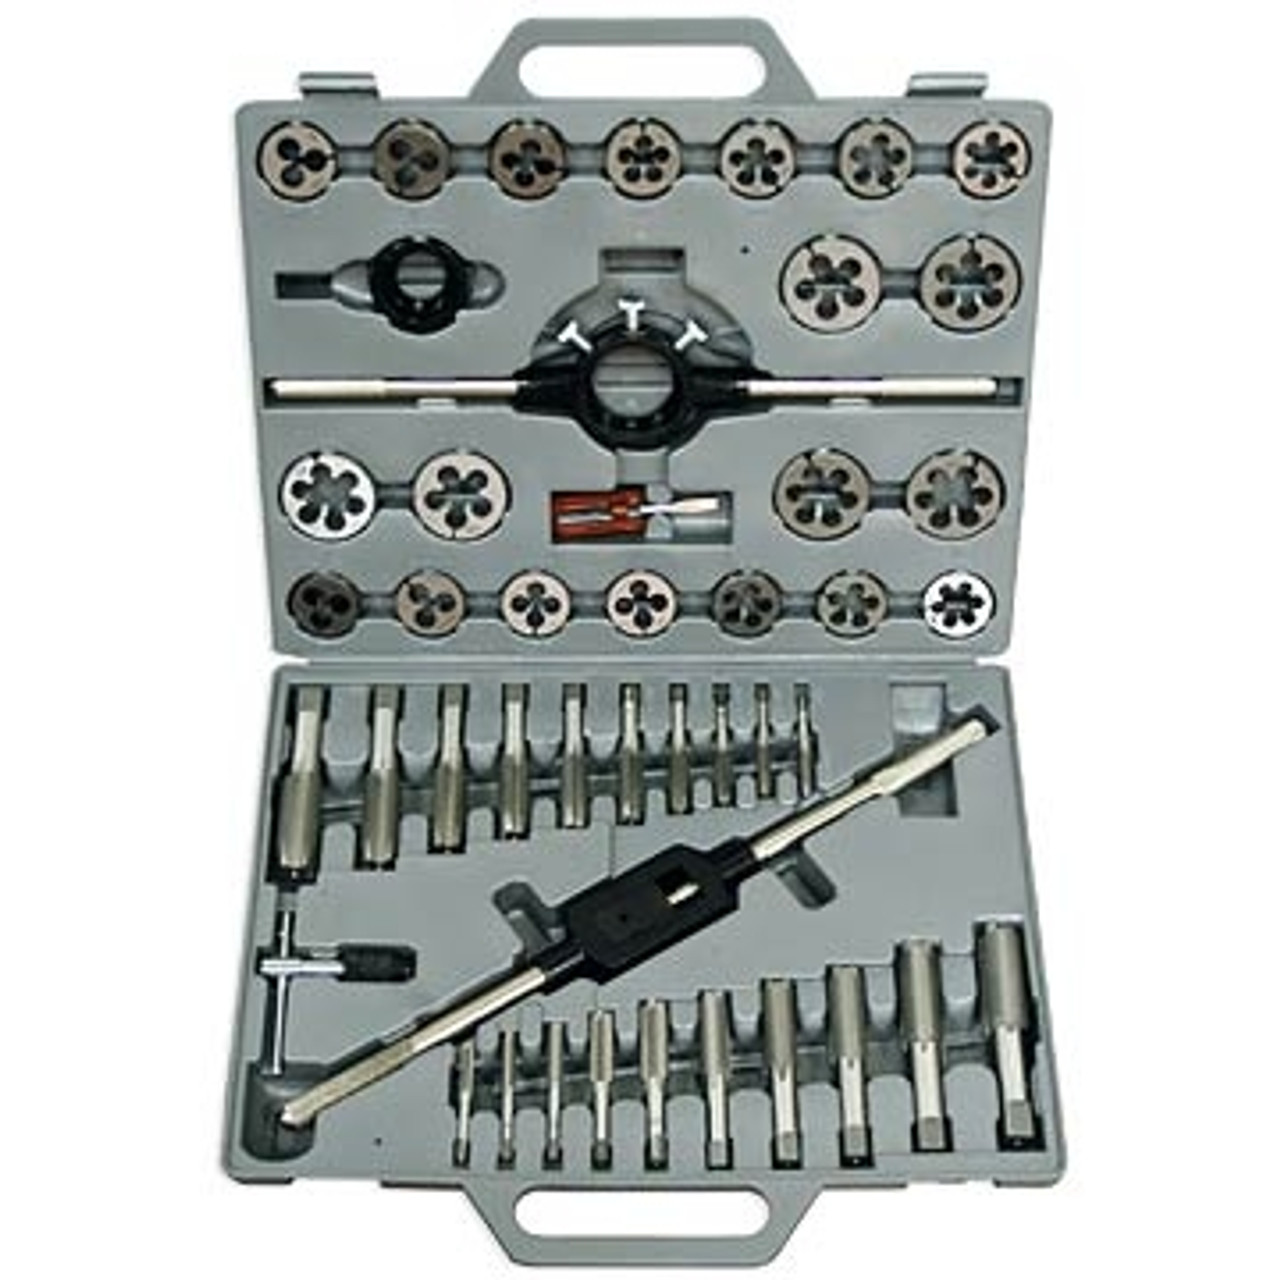 Taps and Die Set | DrillsandCutters.com